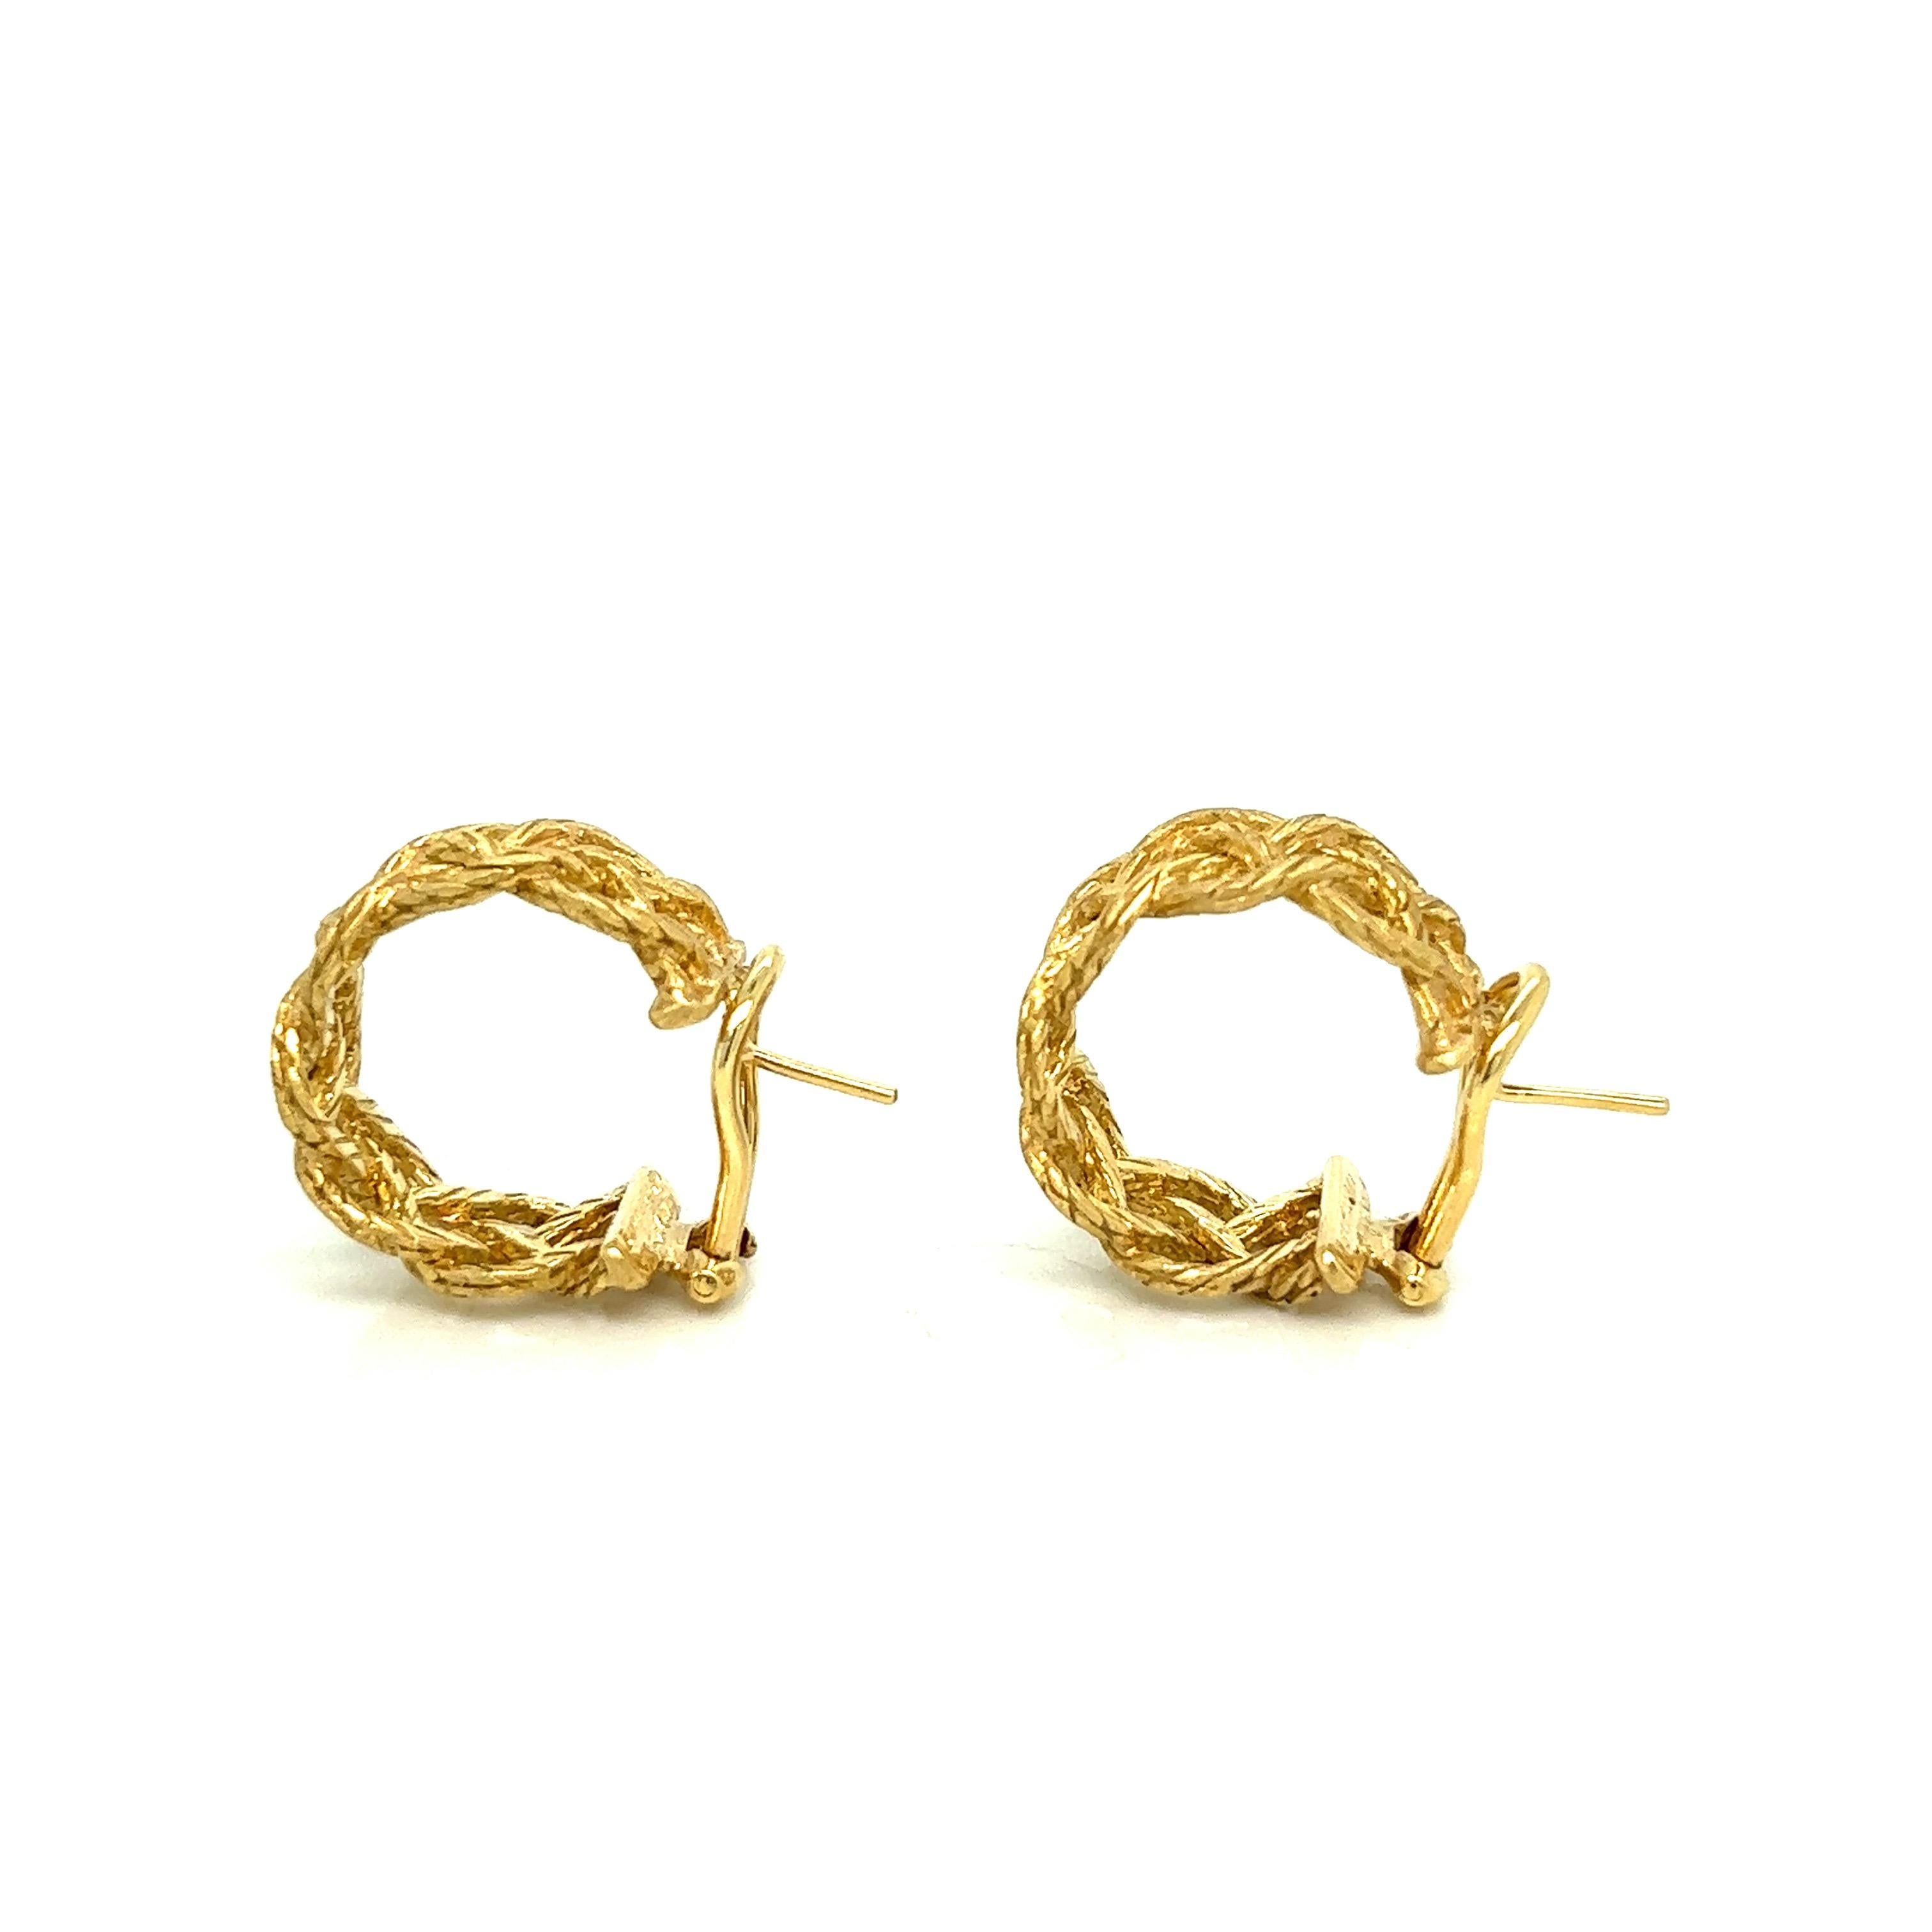 Buccellati Gold Braided Earrings In Excellent Condition For Sale In New York, NY